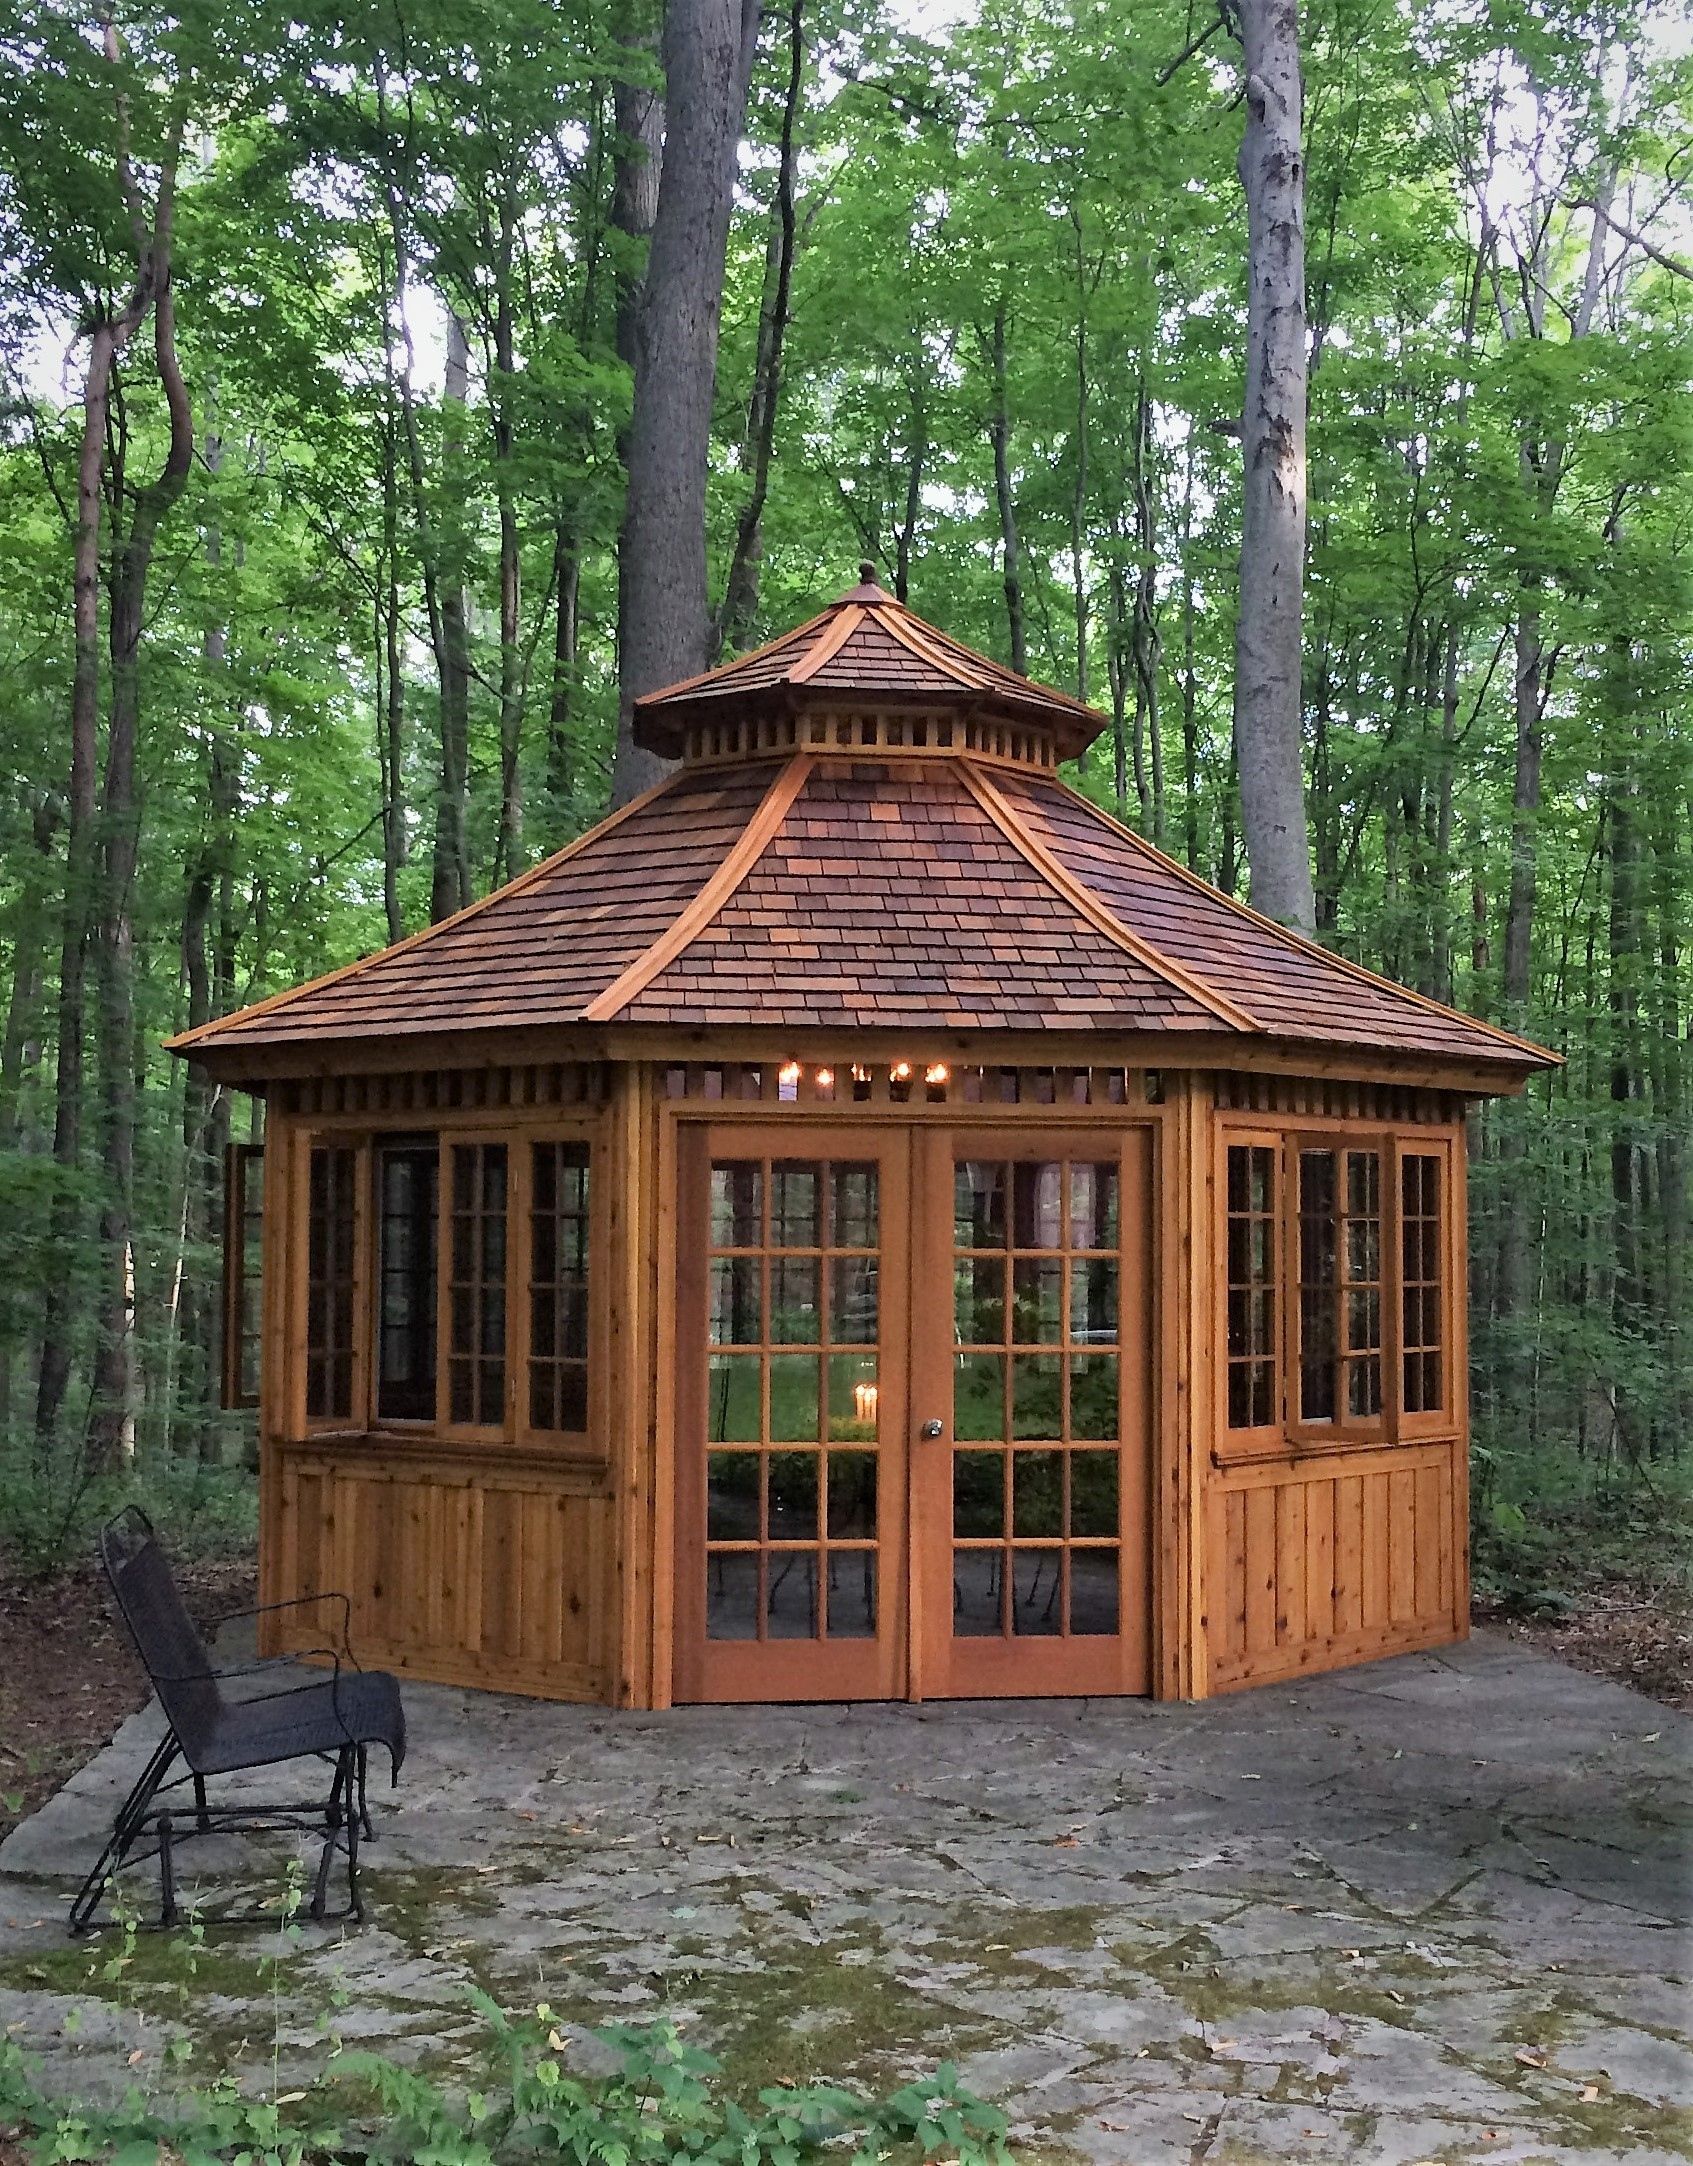 Transform Your Outdoor Space with a
Stylish Patio Gazebo